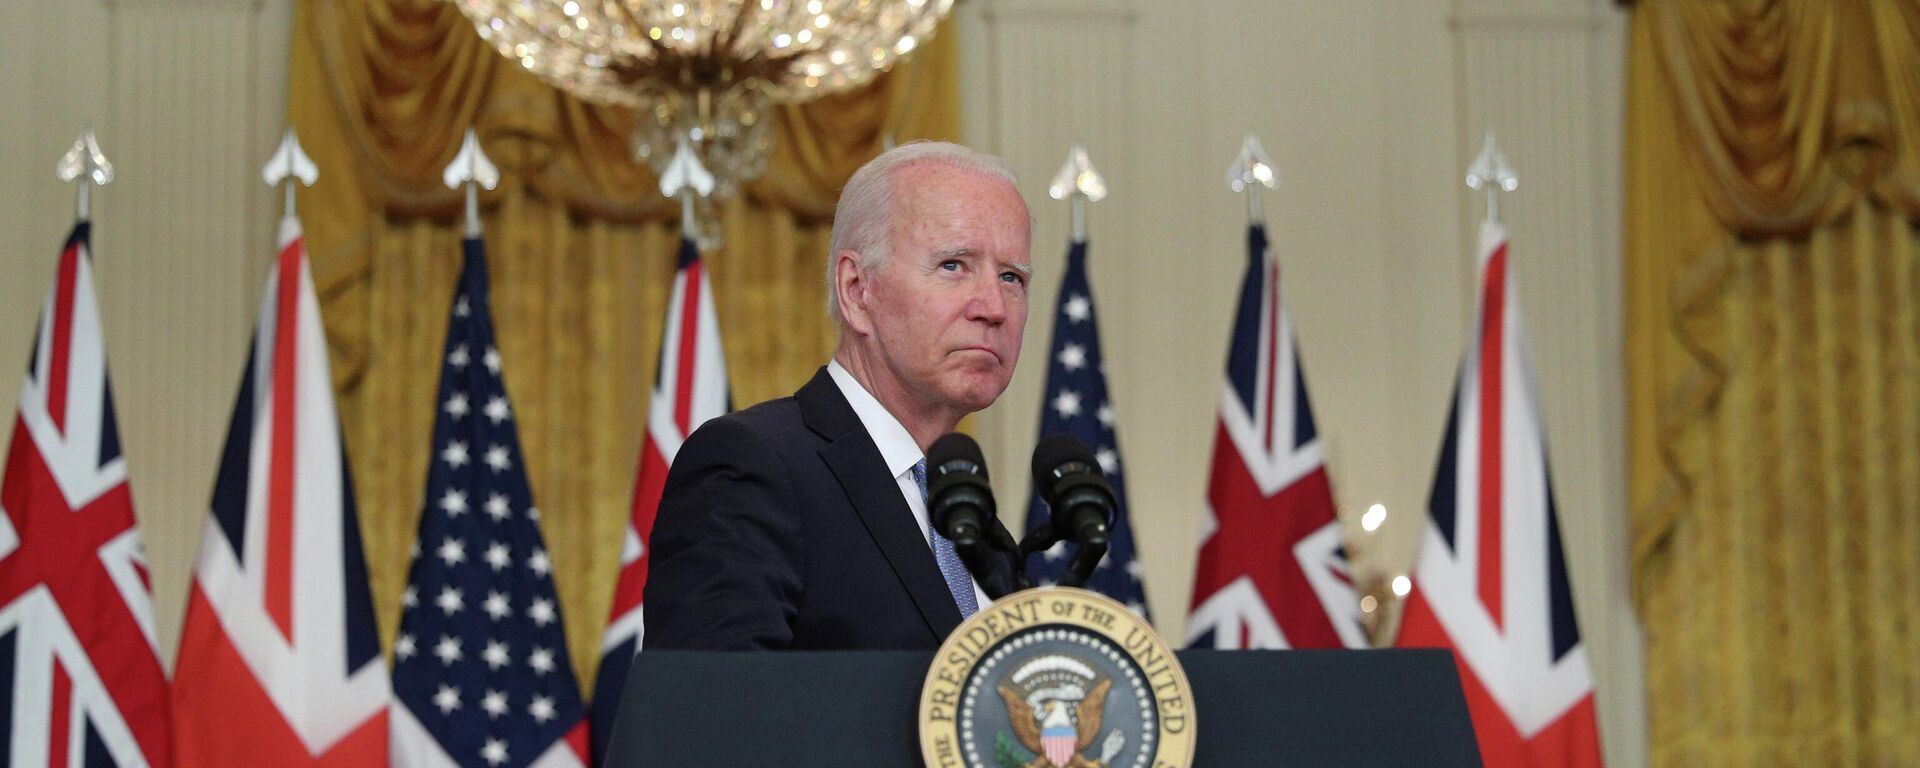 U.S. President Joe Biden delivers remarks on a National Security Initiative virtually with Australian Prime Minister Scott Morrison and British Prime Minister Boris Johnson, both not pictured, inside the East Room at the White House in Washington, U.S., September 15, 2021 - Sputnik International, 1920, 16.09.2021